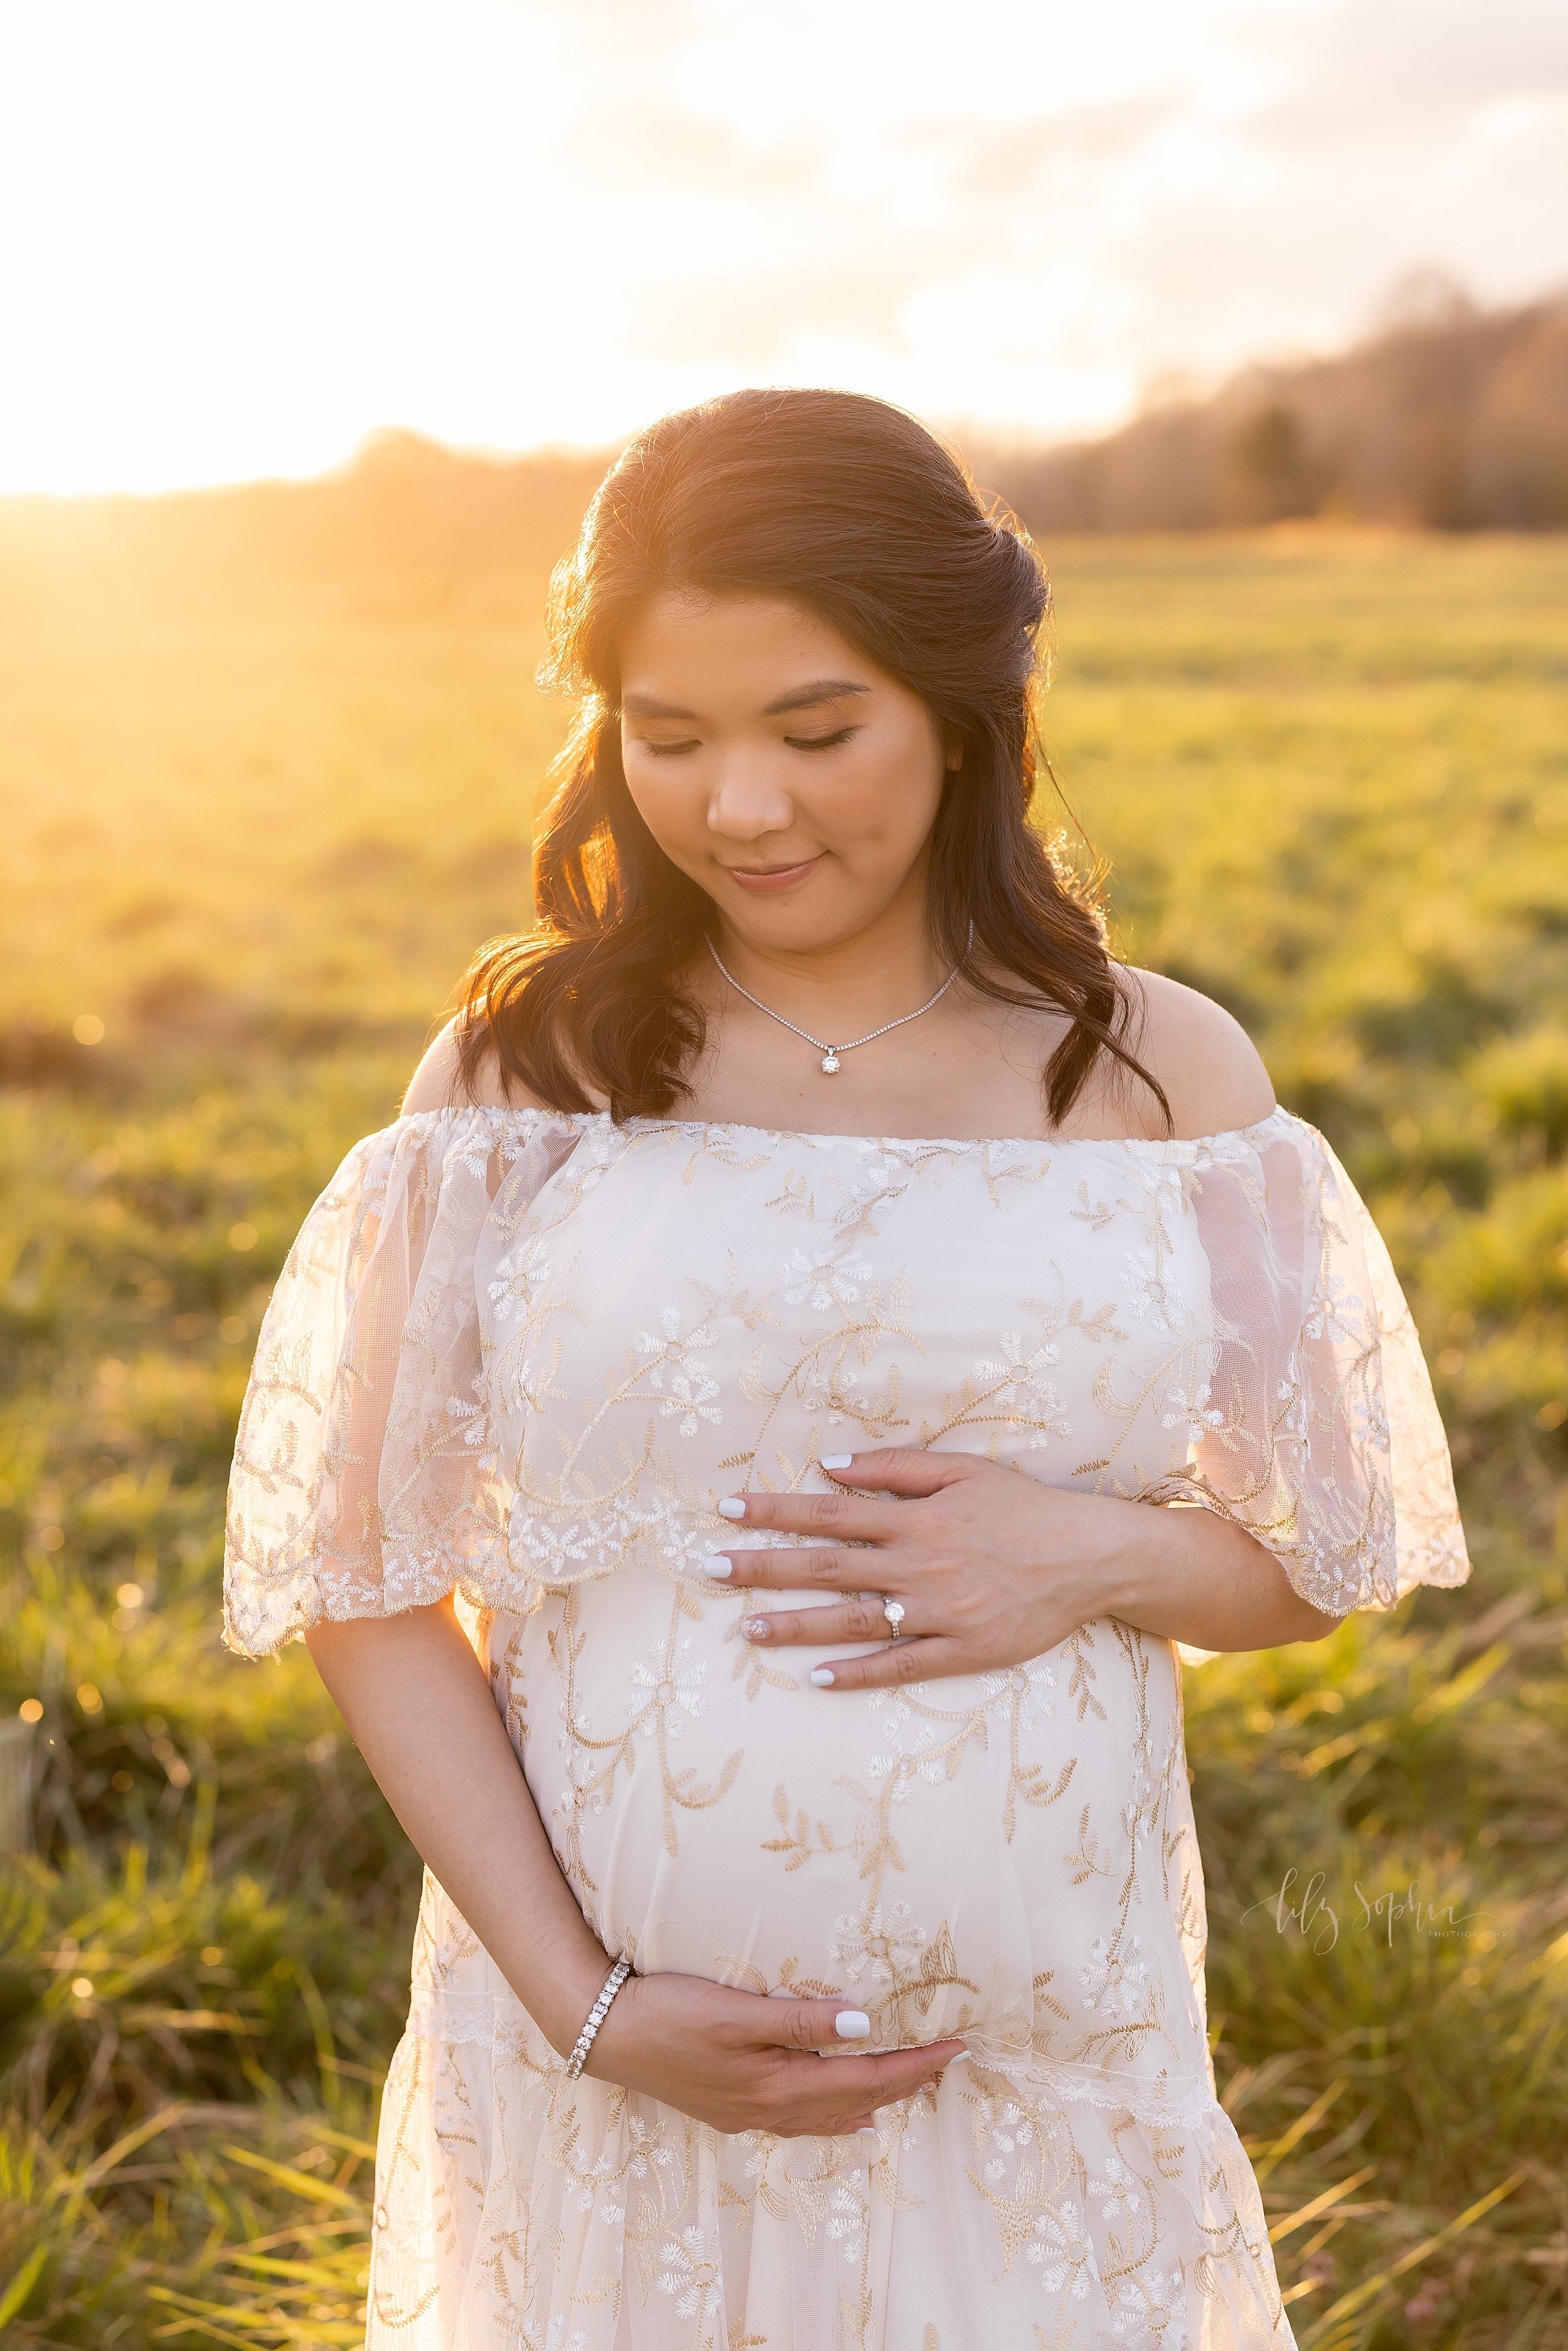  Maternity photo session of an Asian mother wearing an off the shoulder full-length gown with a wide lace bodice placing her hands to frame her belly as she contemplates the birth of her child with the sun setting behind her while standing in an Atla